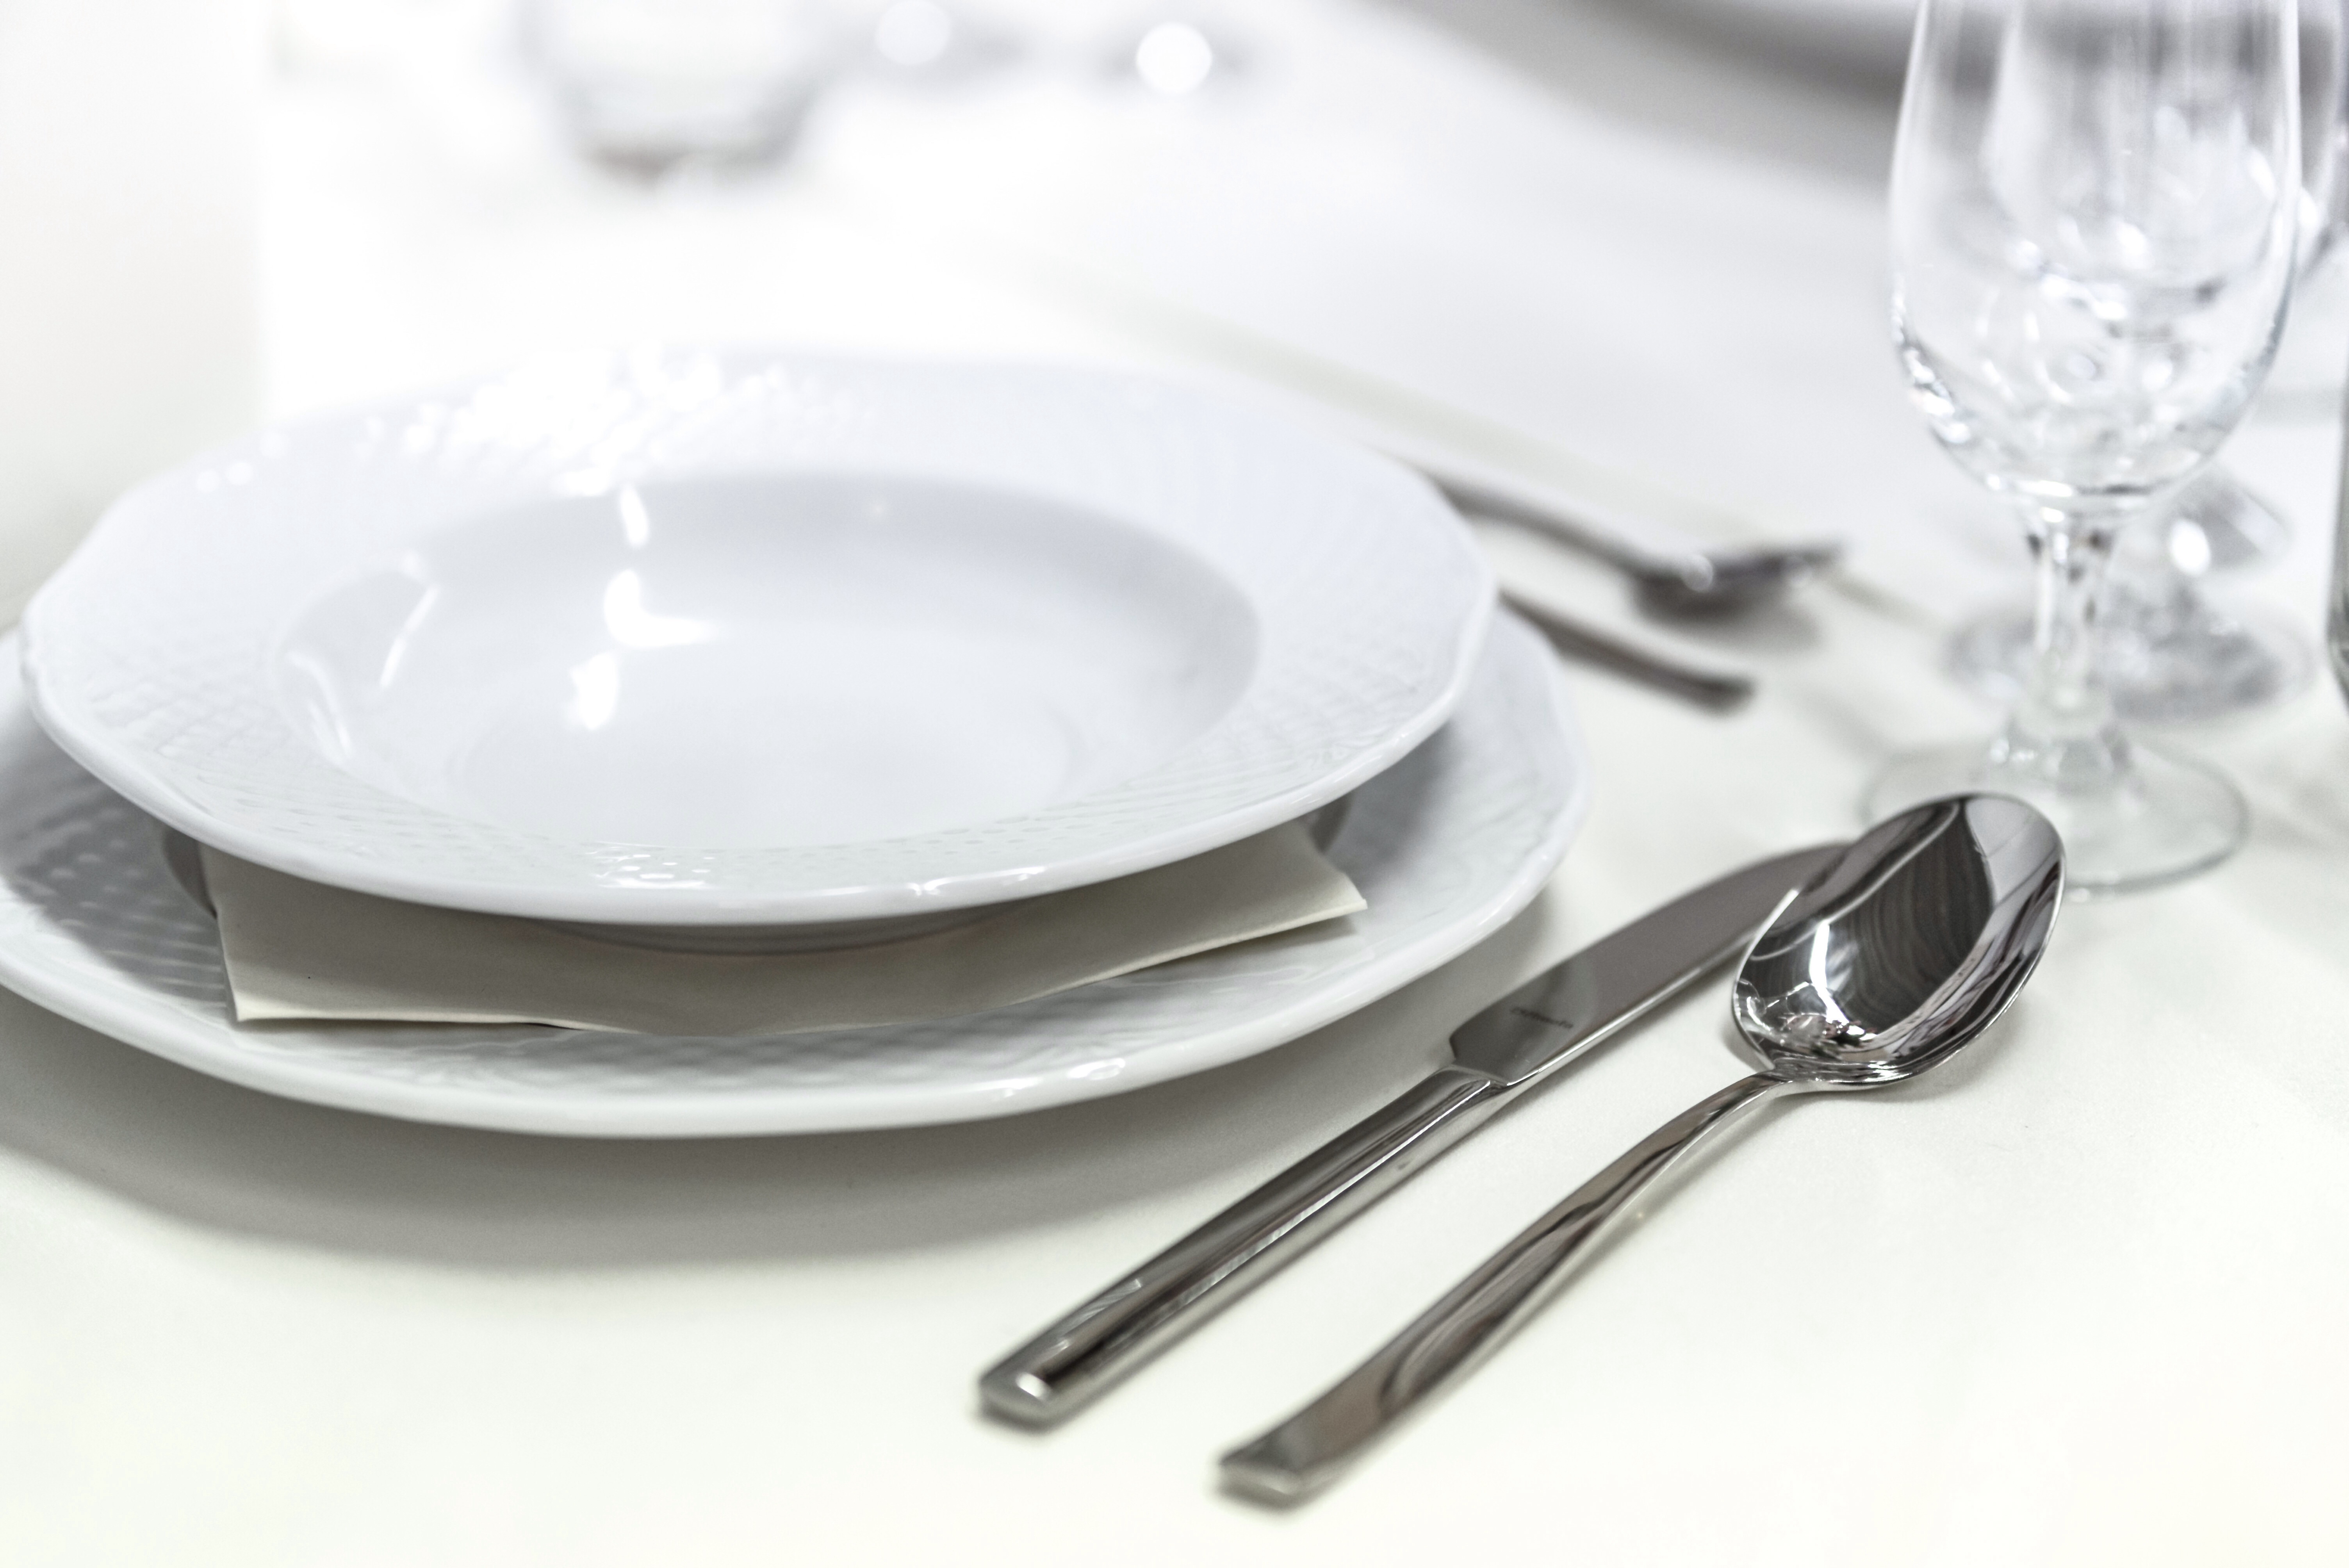 Image of a clean set of dishes ready to eat from.